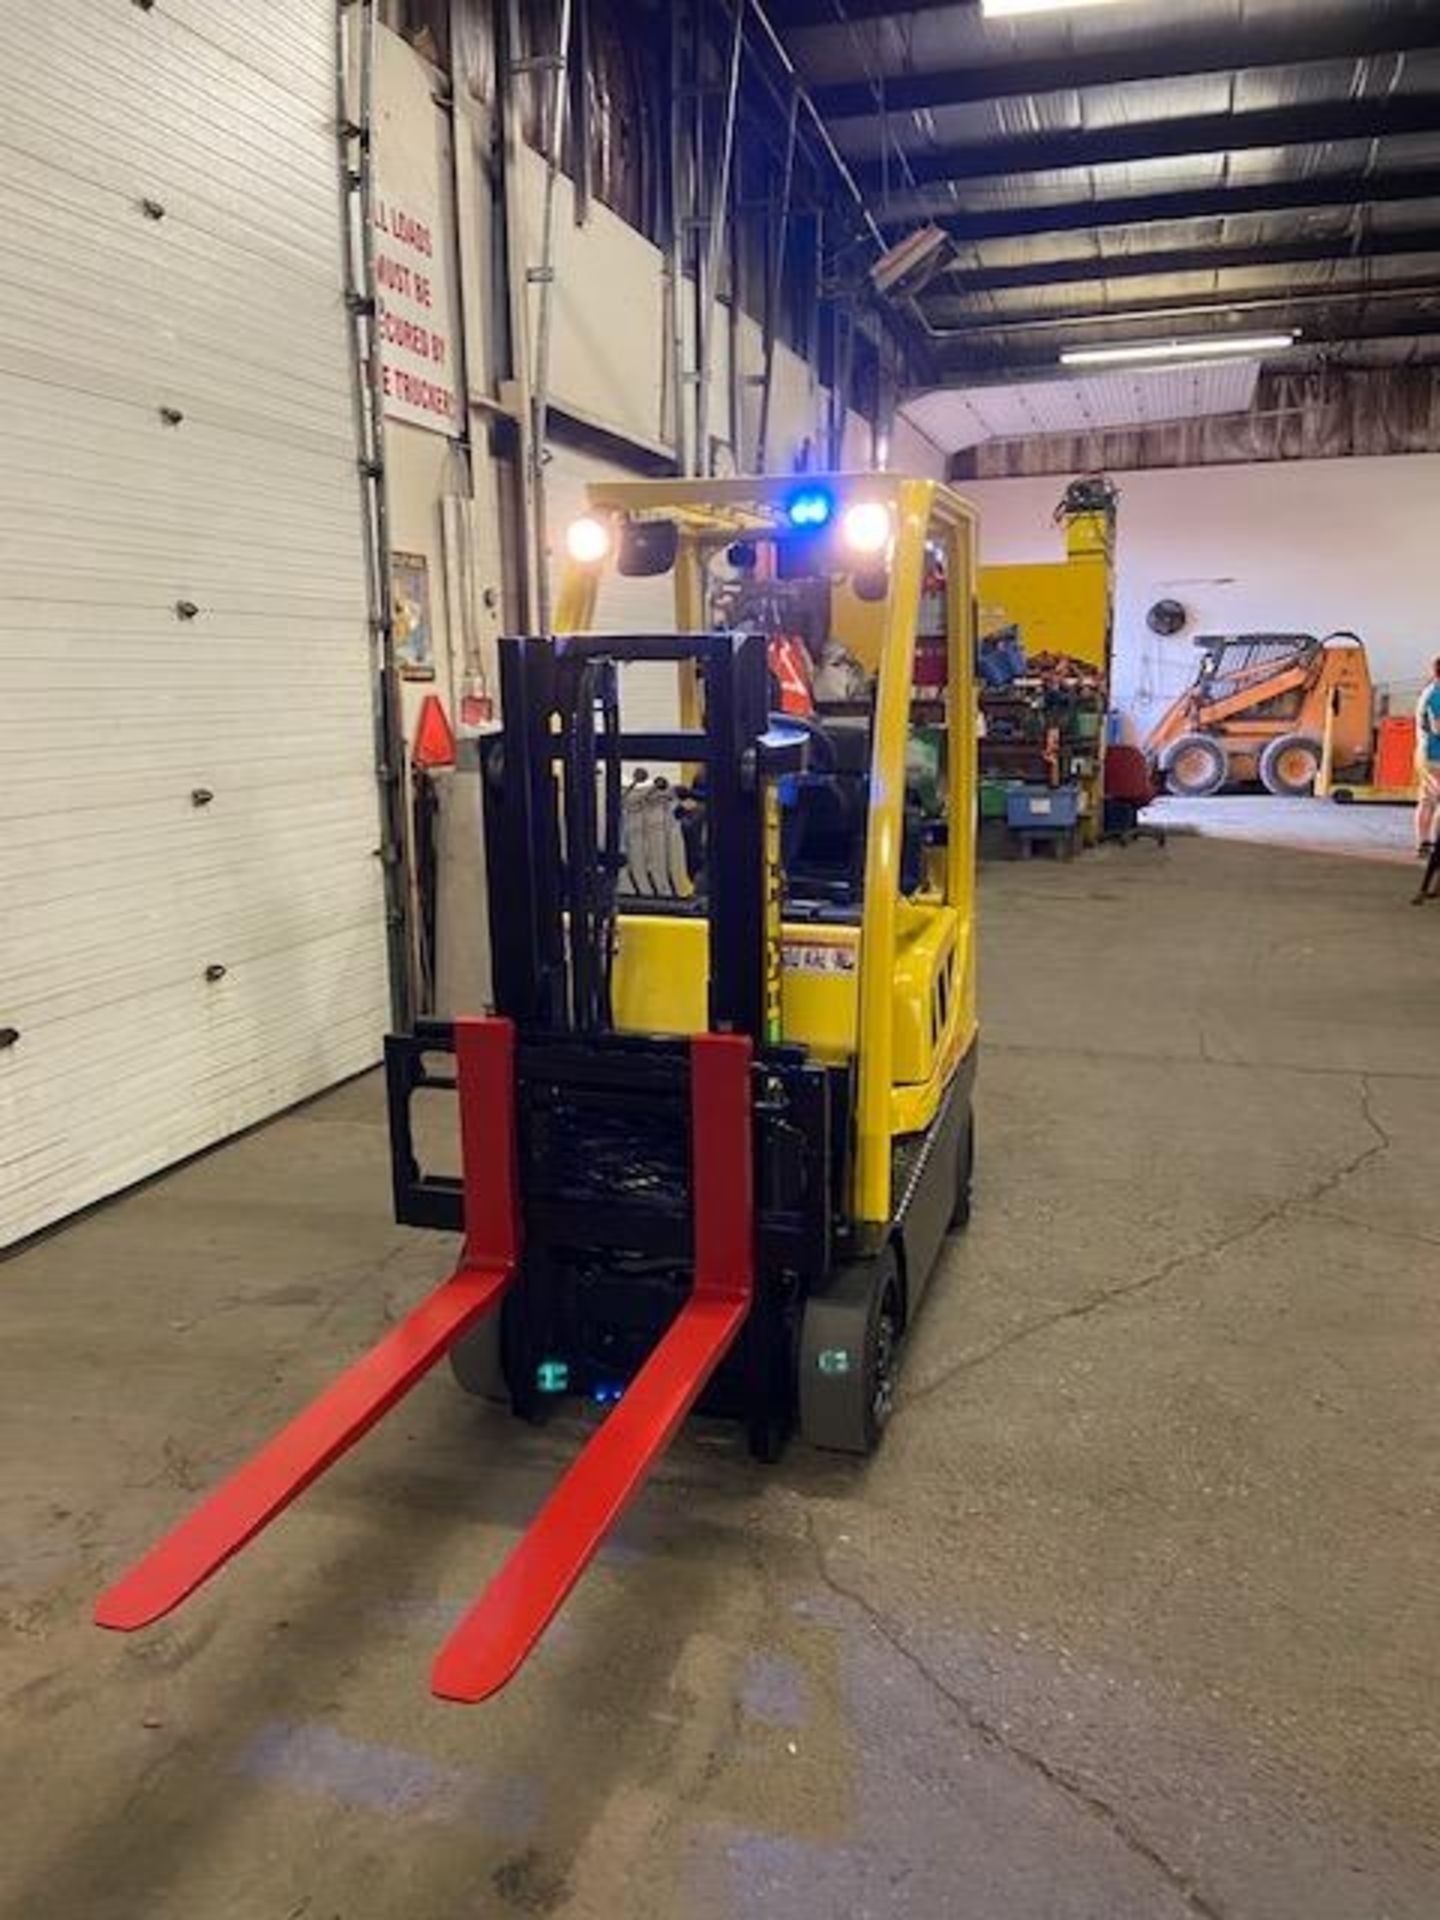 FREE CUSTOMS - 2015 Hyster 3000lbs Capacity Forklift LPG (propane) with sideshift (no propane tank - Image 2 of 3